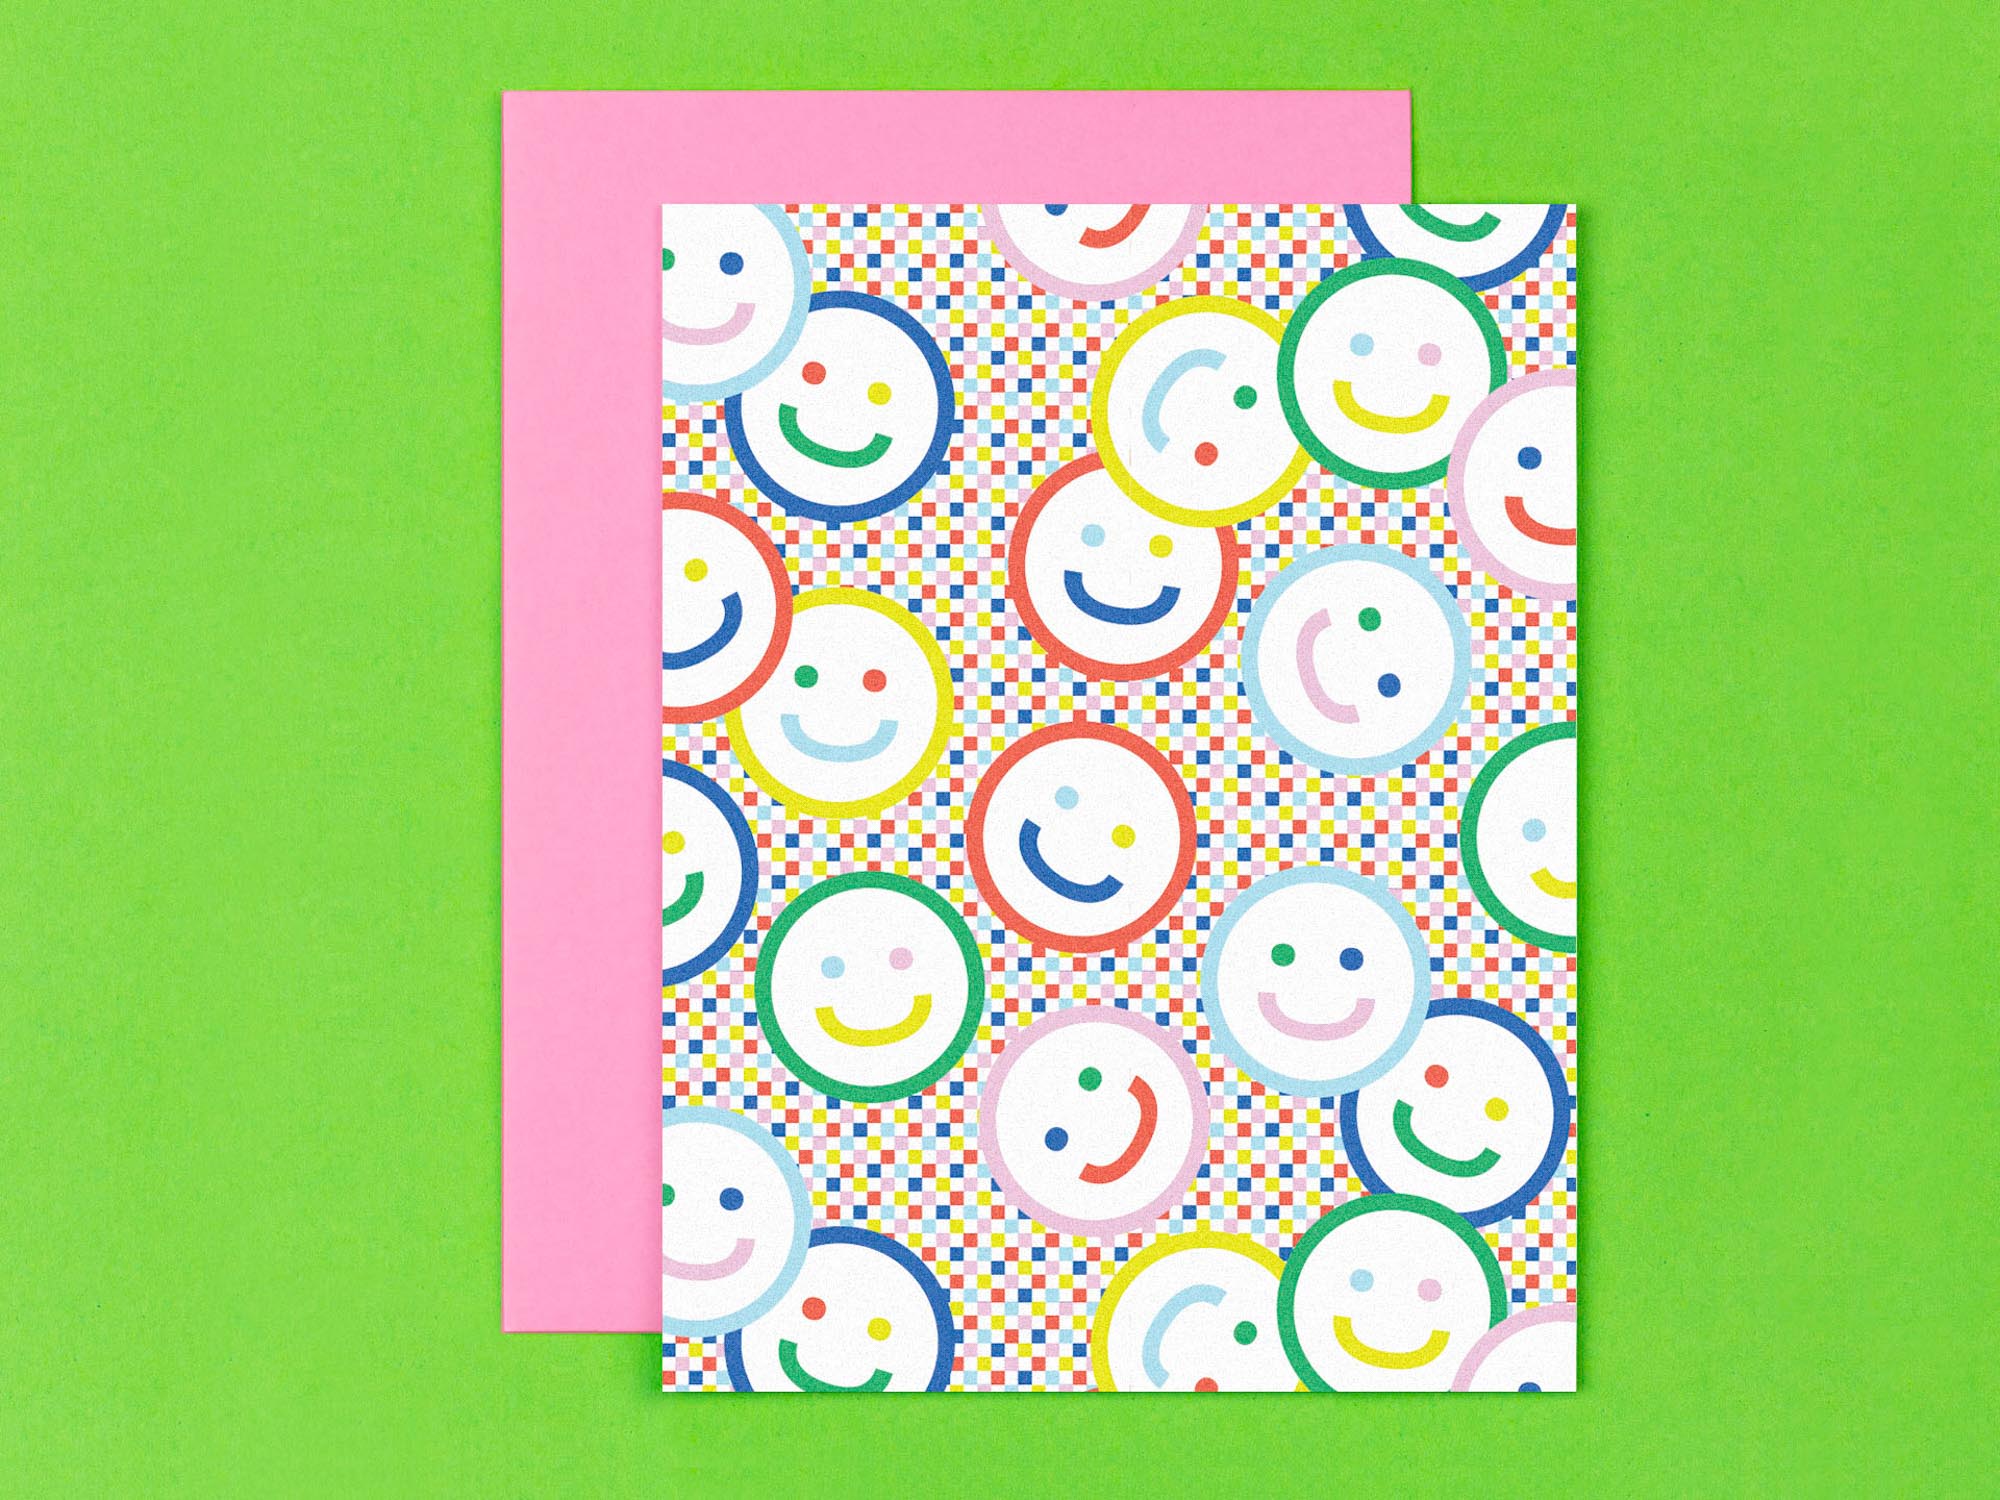 "Check yr smile" blank pattern greeting card with smiley faces against a rainbow checker background. Made in USA by @mydarlin_bk